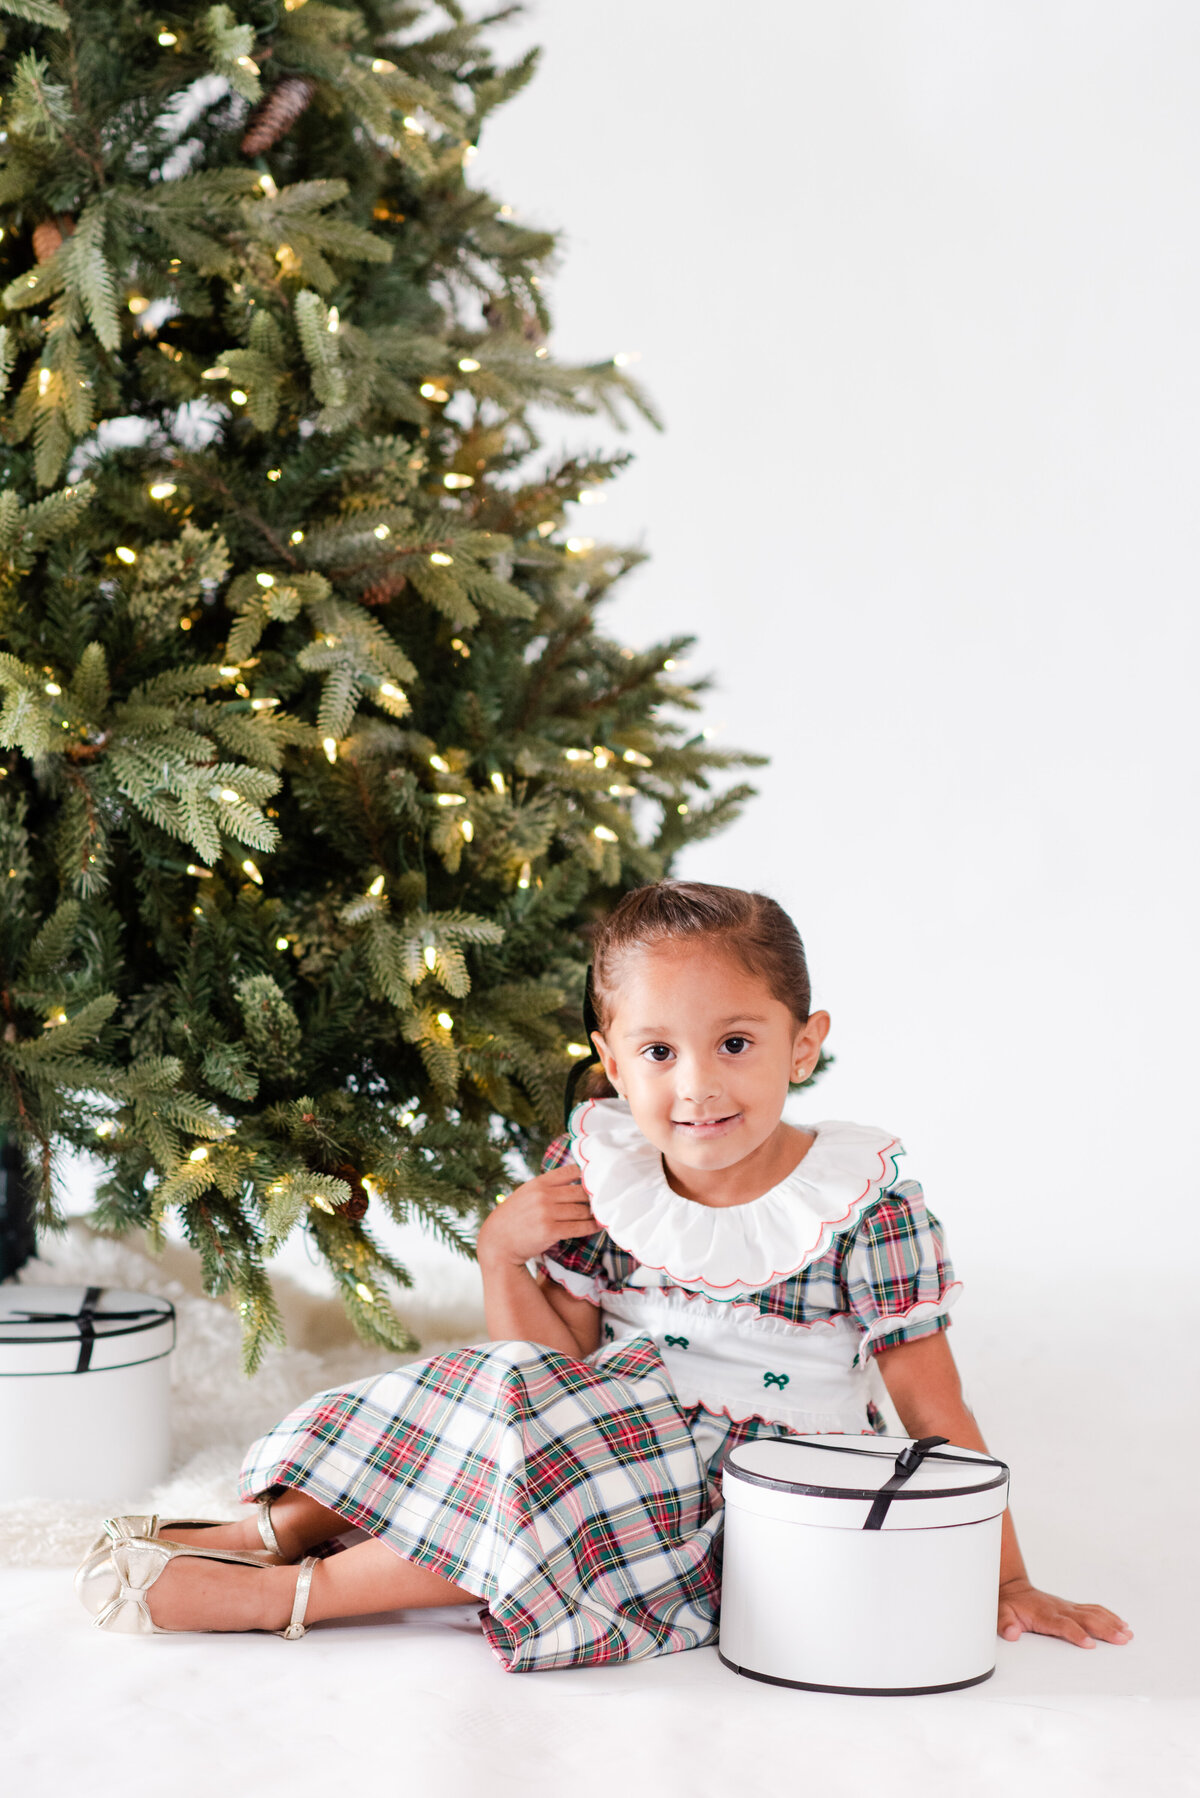 Gallery-2022_11-05 Christmas Minis with Santa Marques Family M Suarez Photography 34MSuarezPhotography